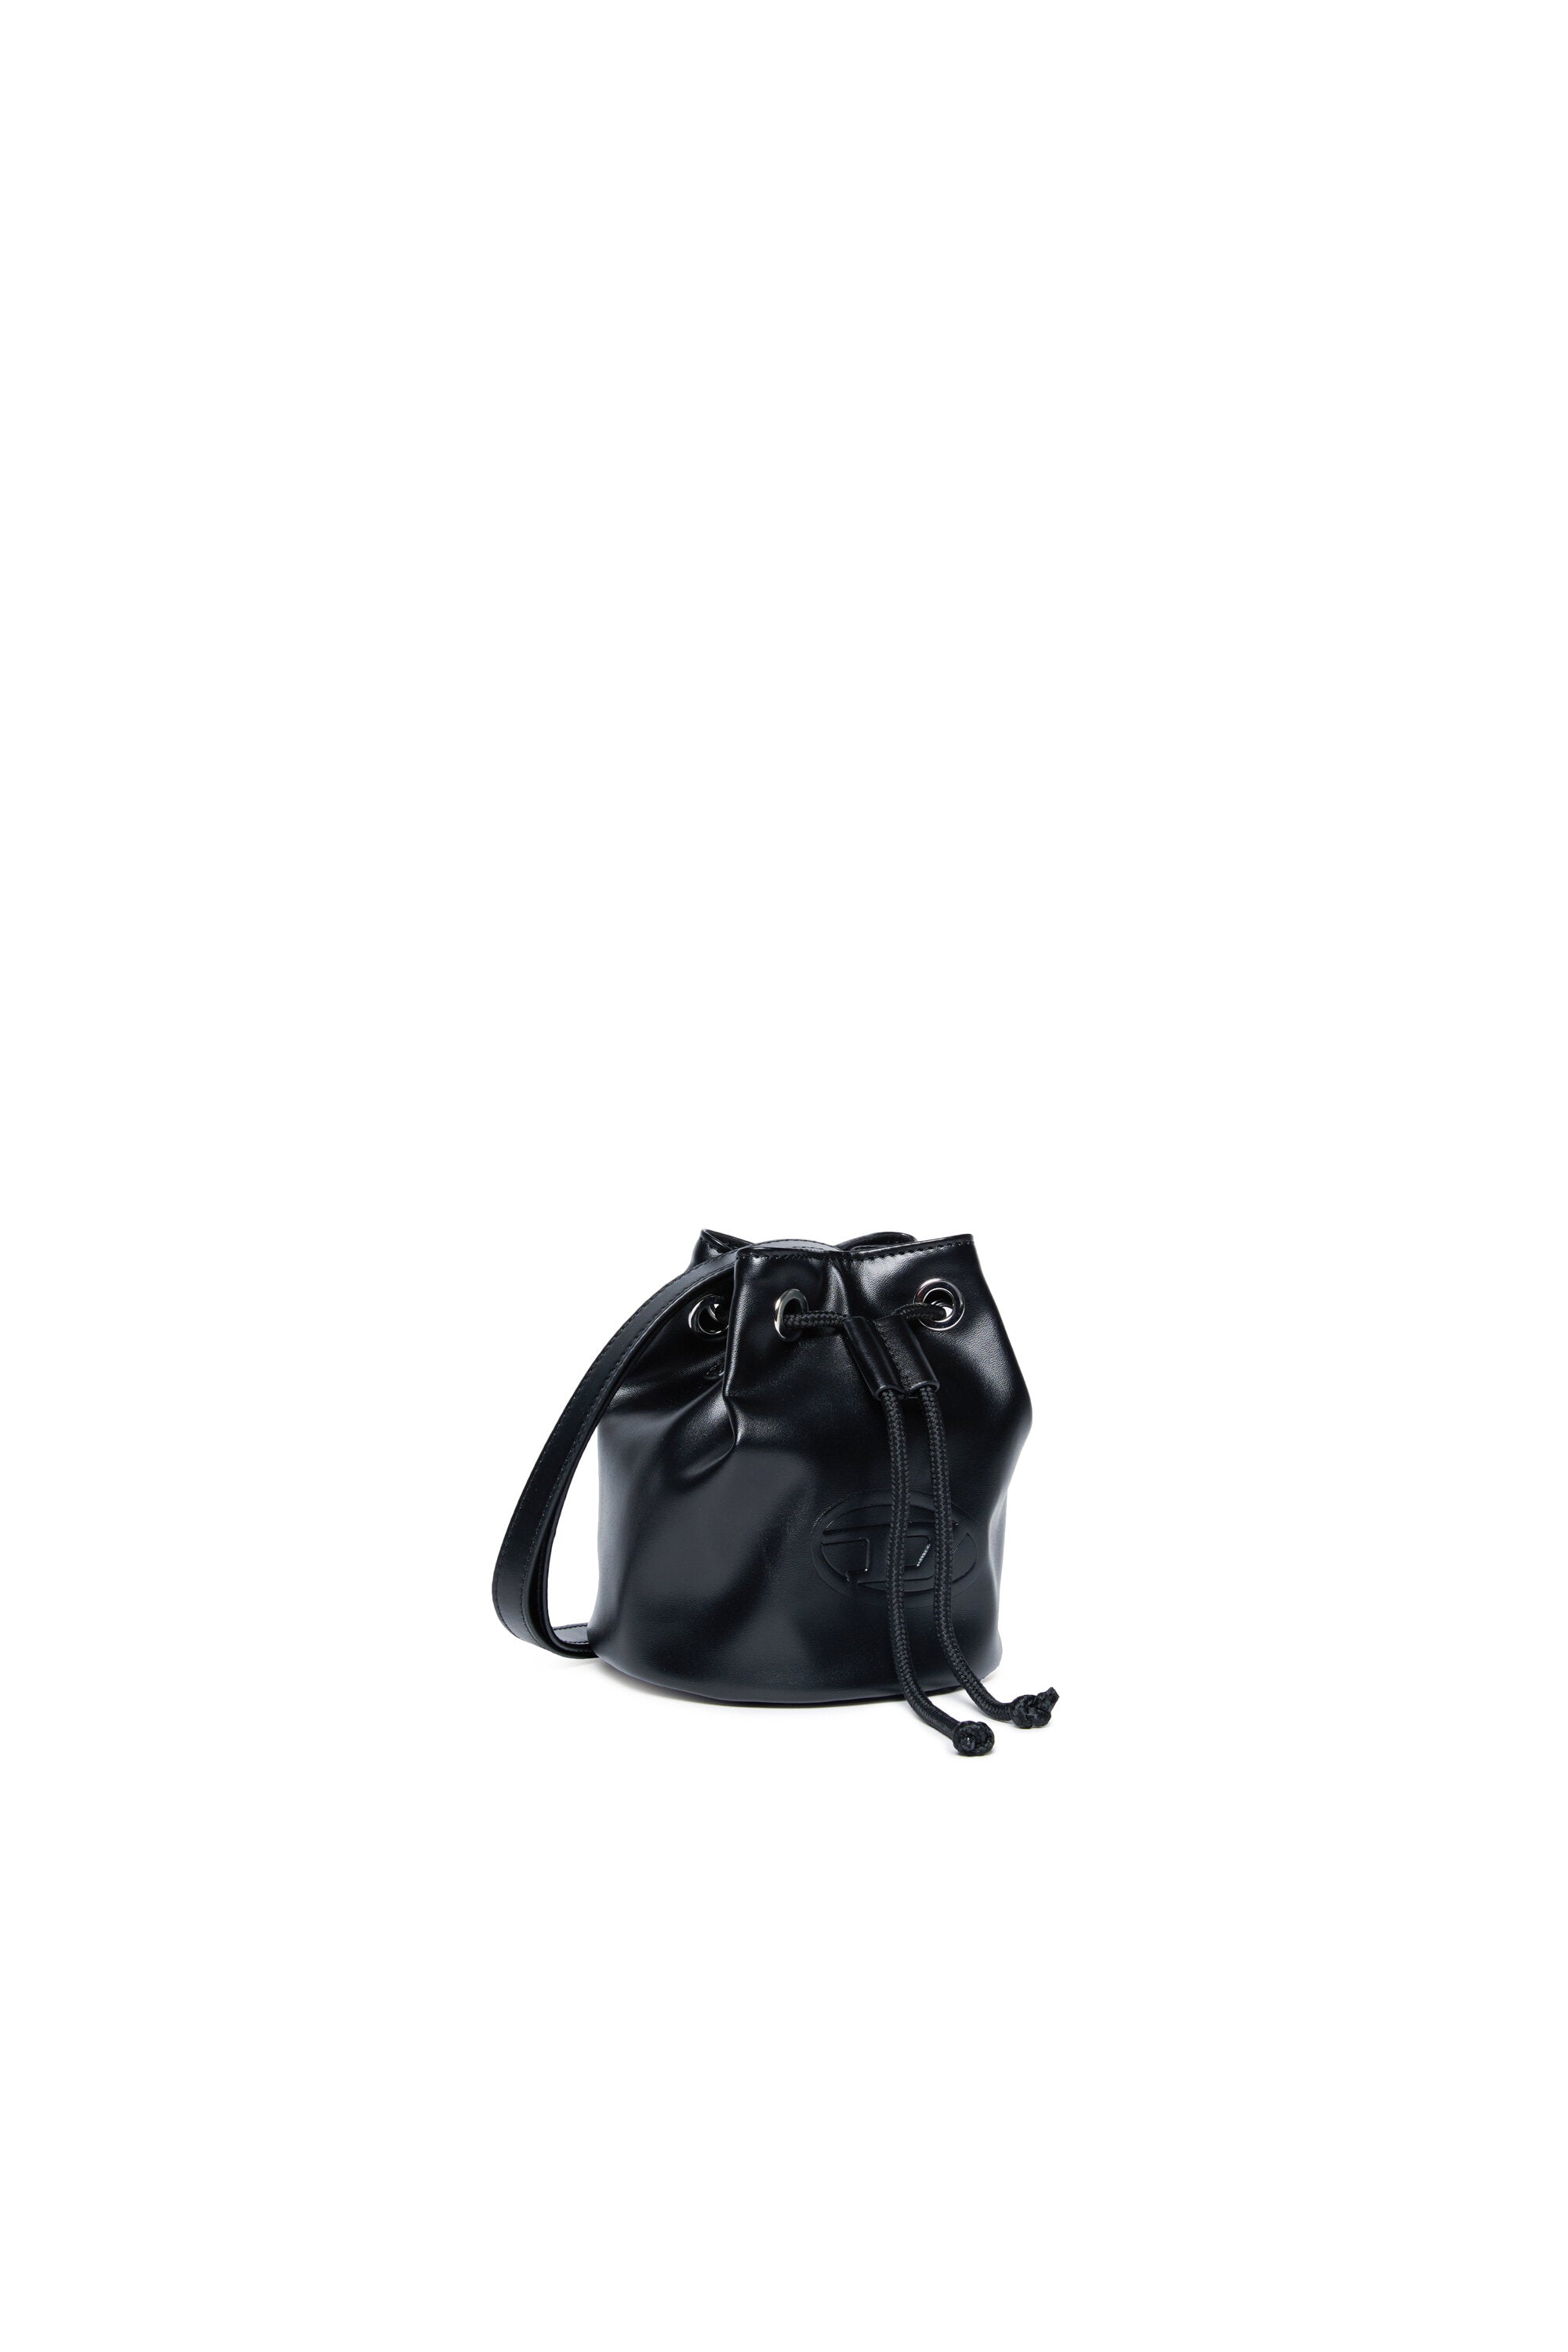 Wellty bag in imitation leather